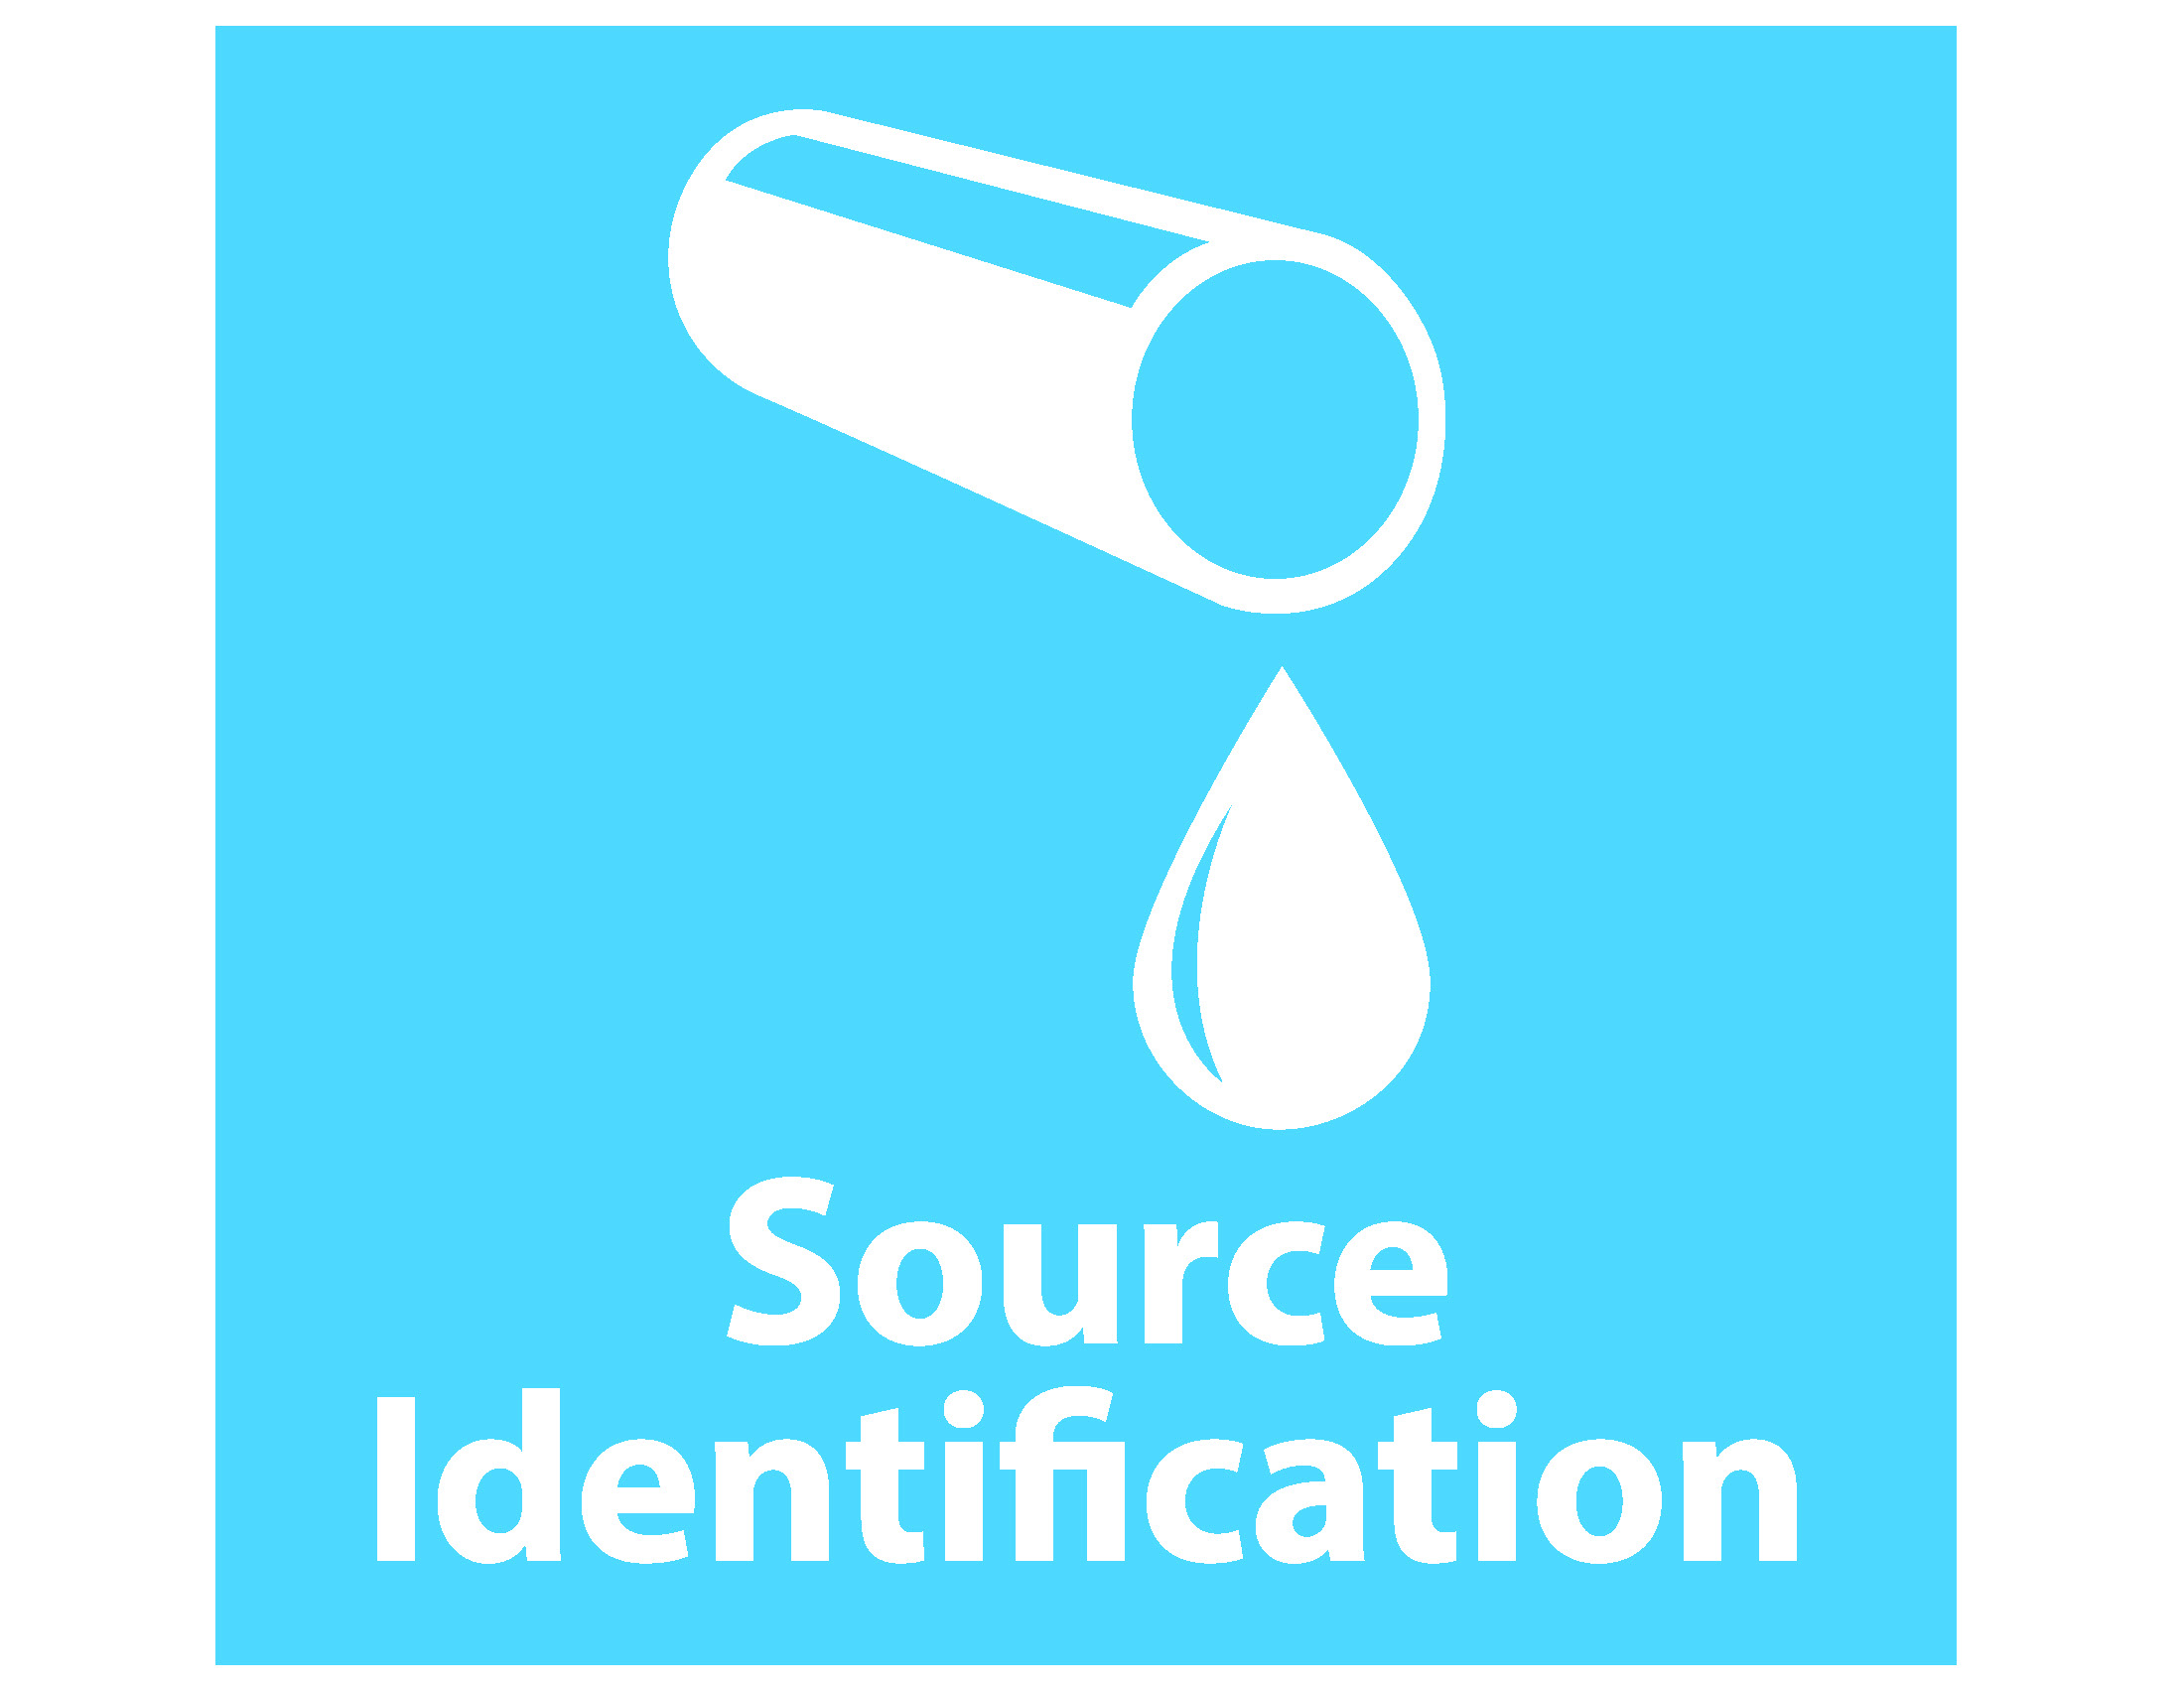 Source identification logo with a water outfall pipe